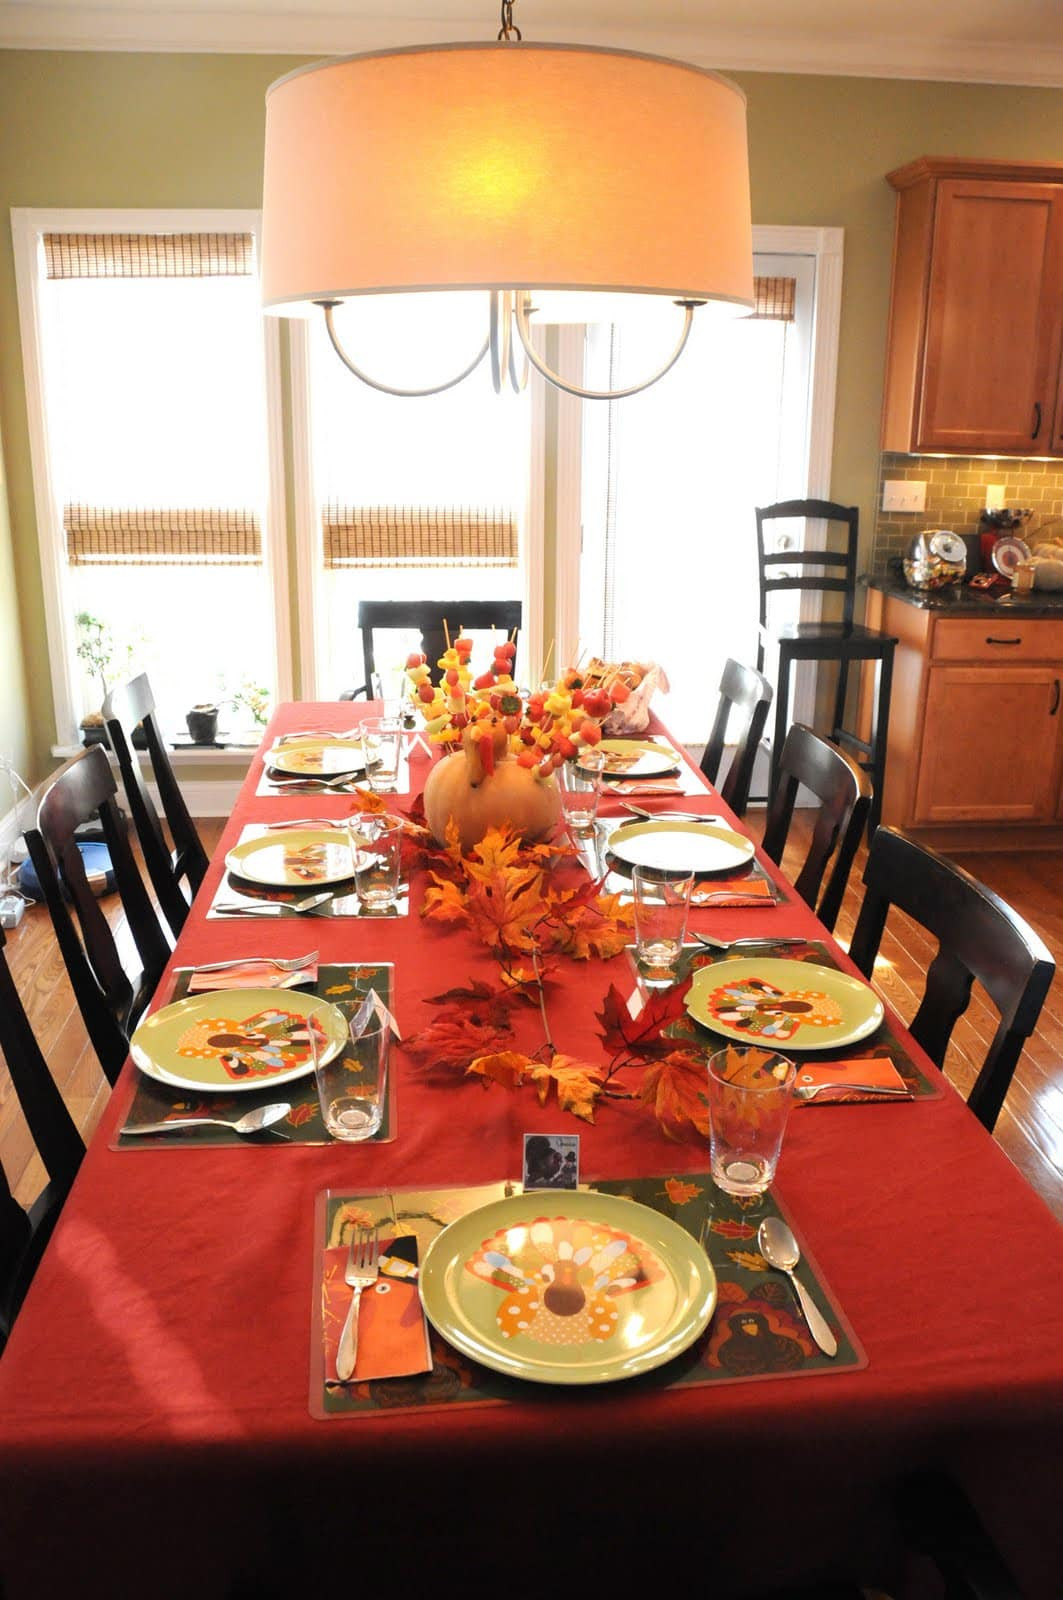 Table Decorations For Thanksgiving
 Thanksgiving Decor The Polkadot Chair